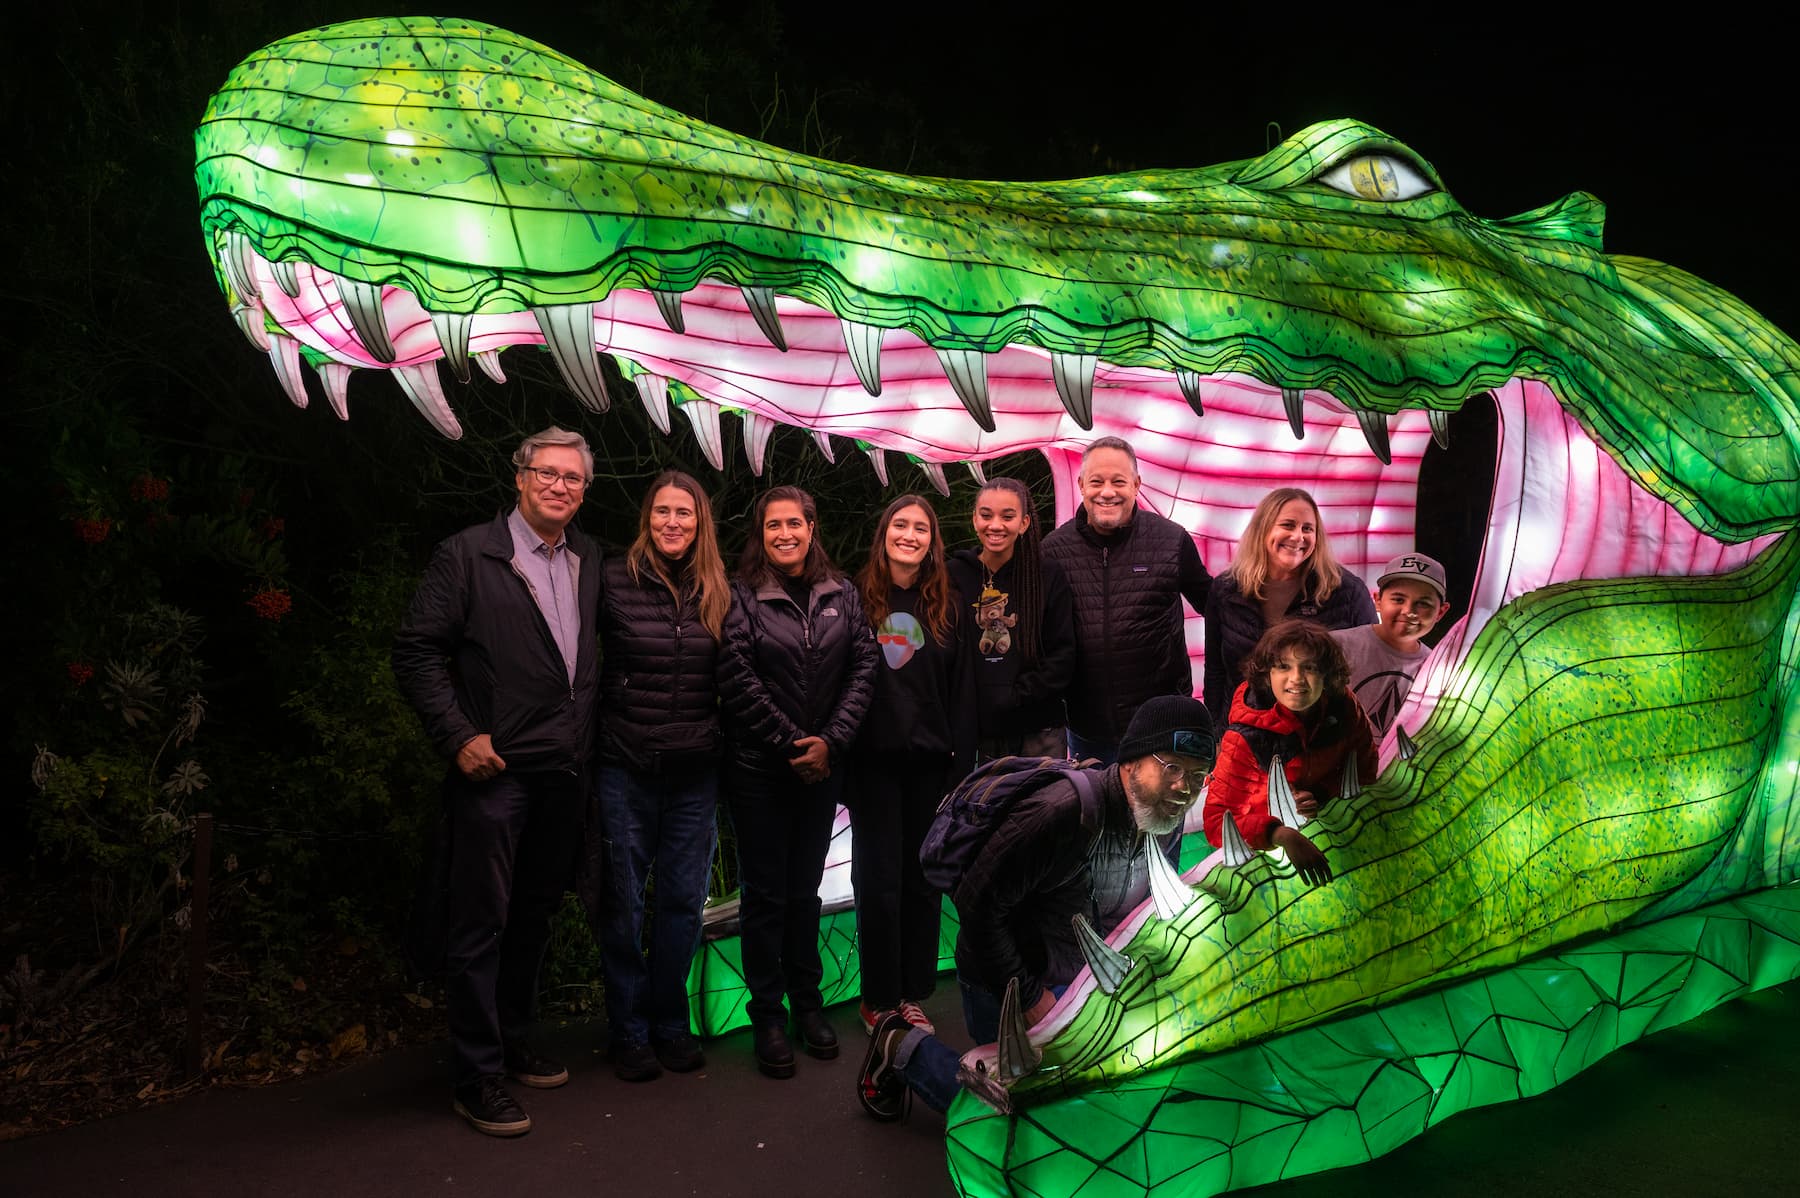 A group standing inside a giant alligator lantern